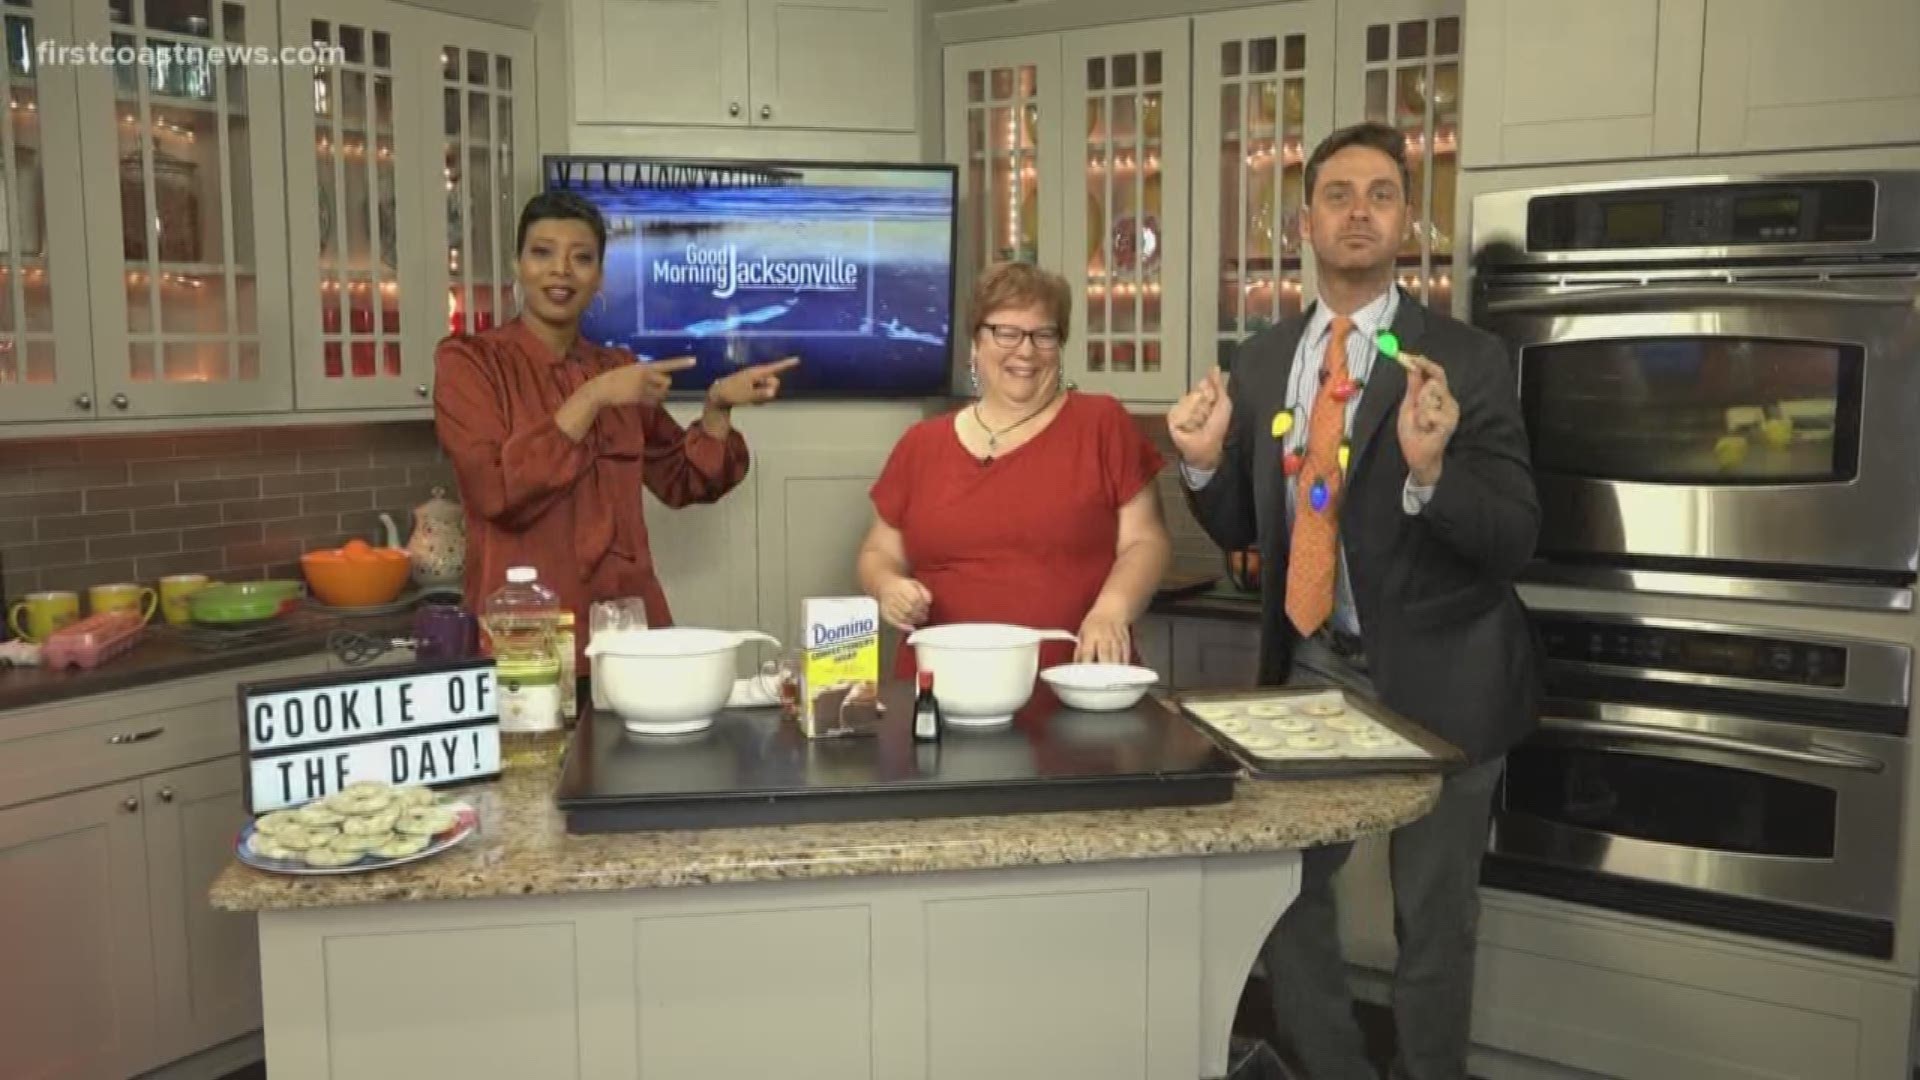 Lori Dorman shows how to make easy Christmas cookies just in time for the holidays.